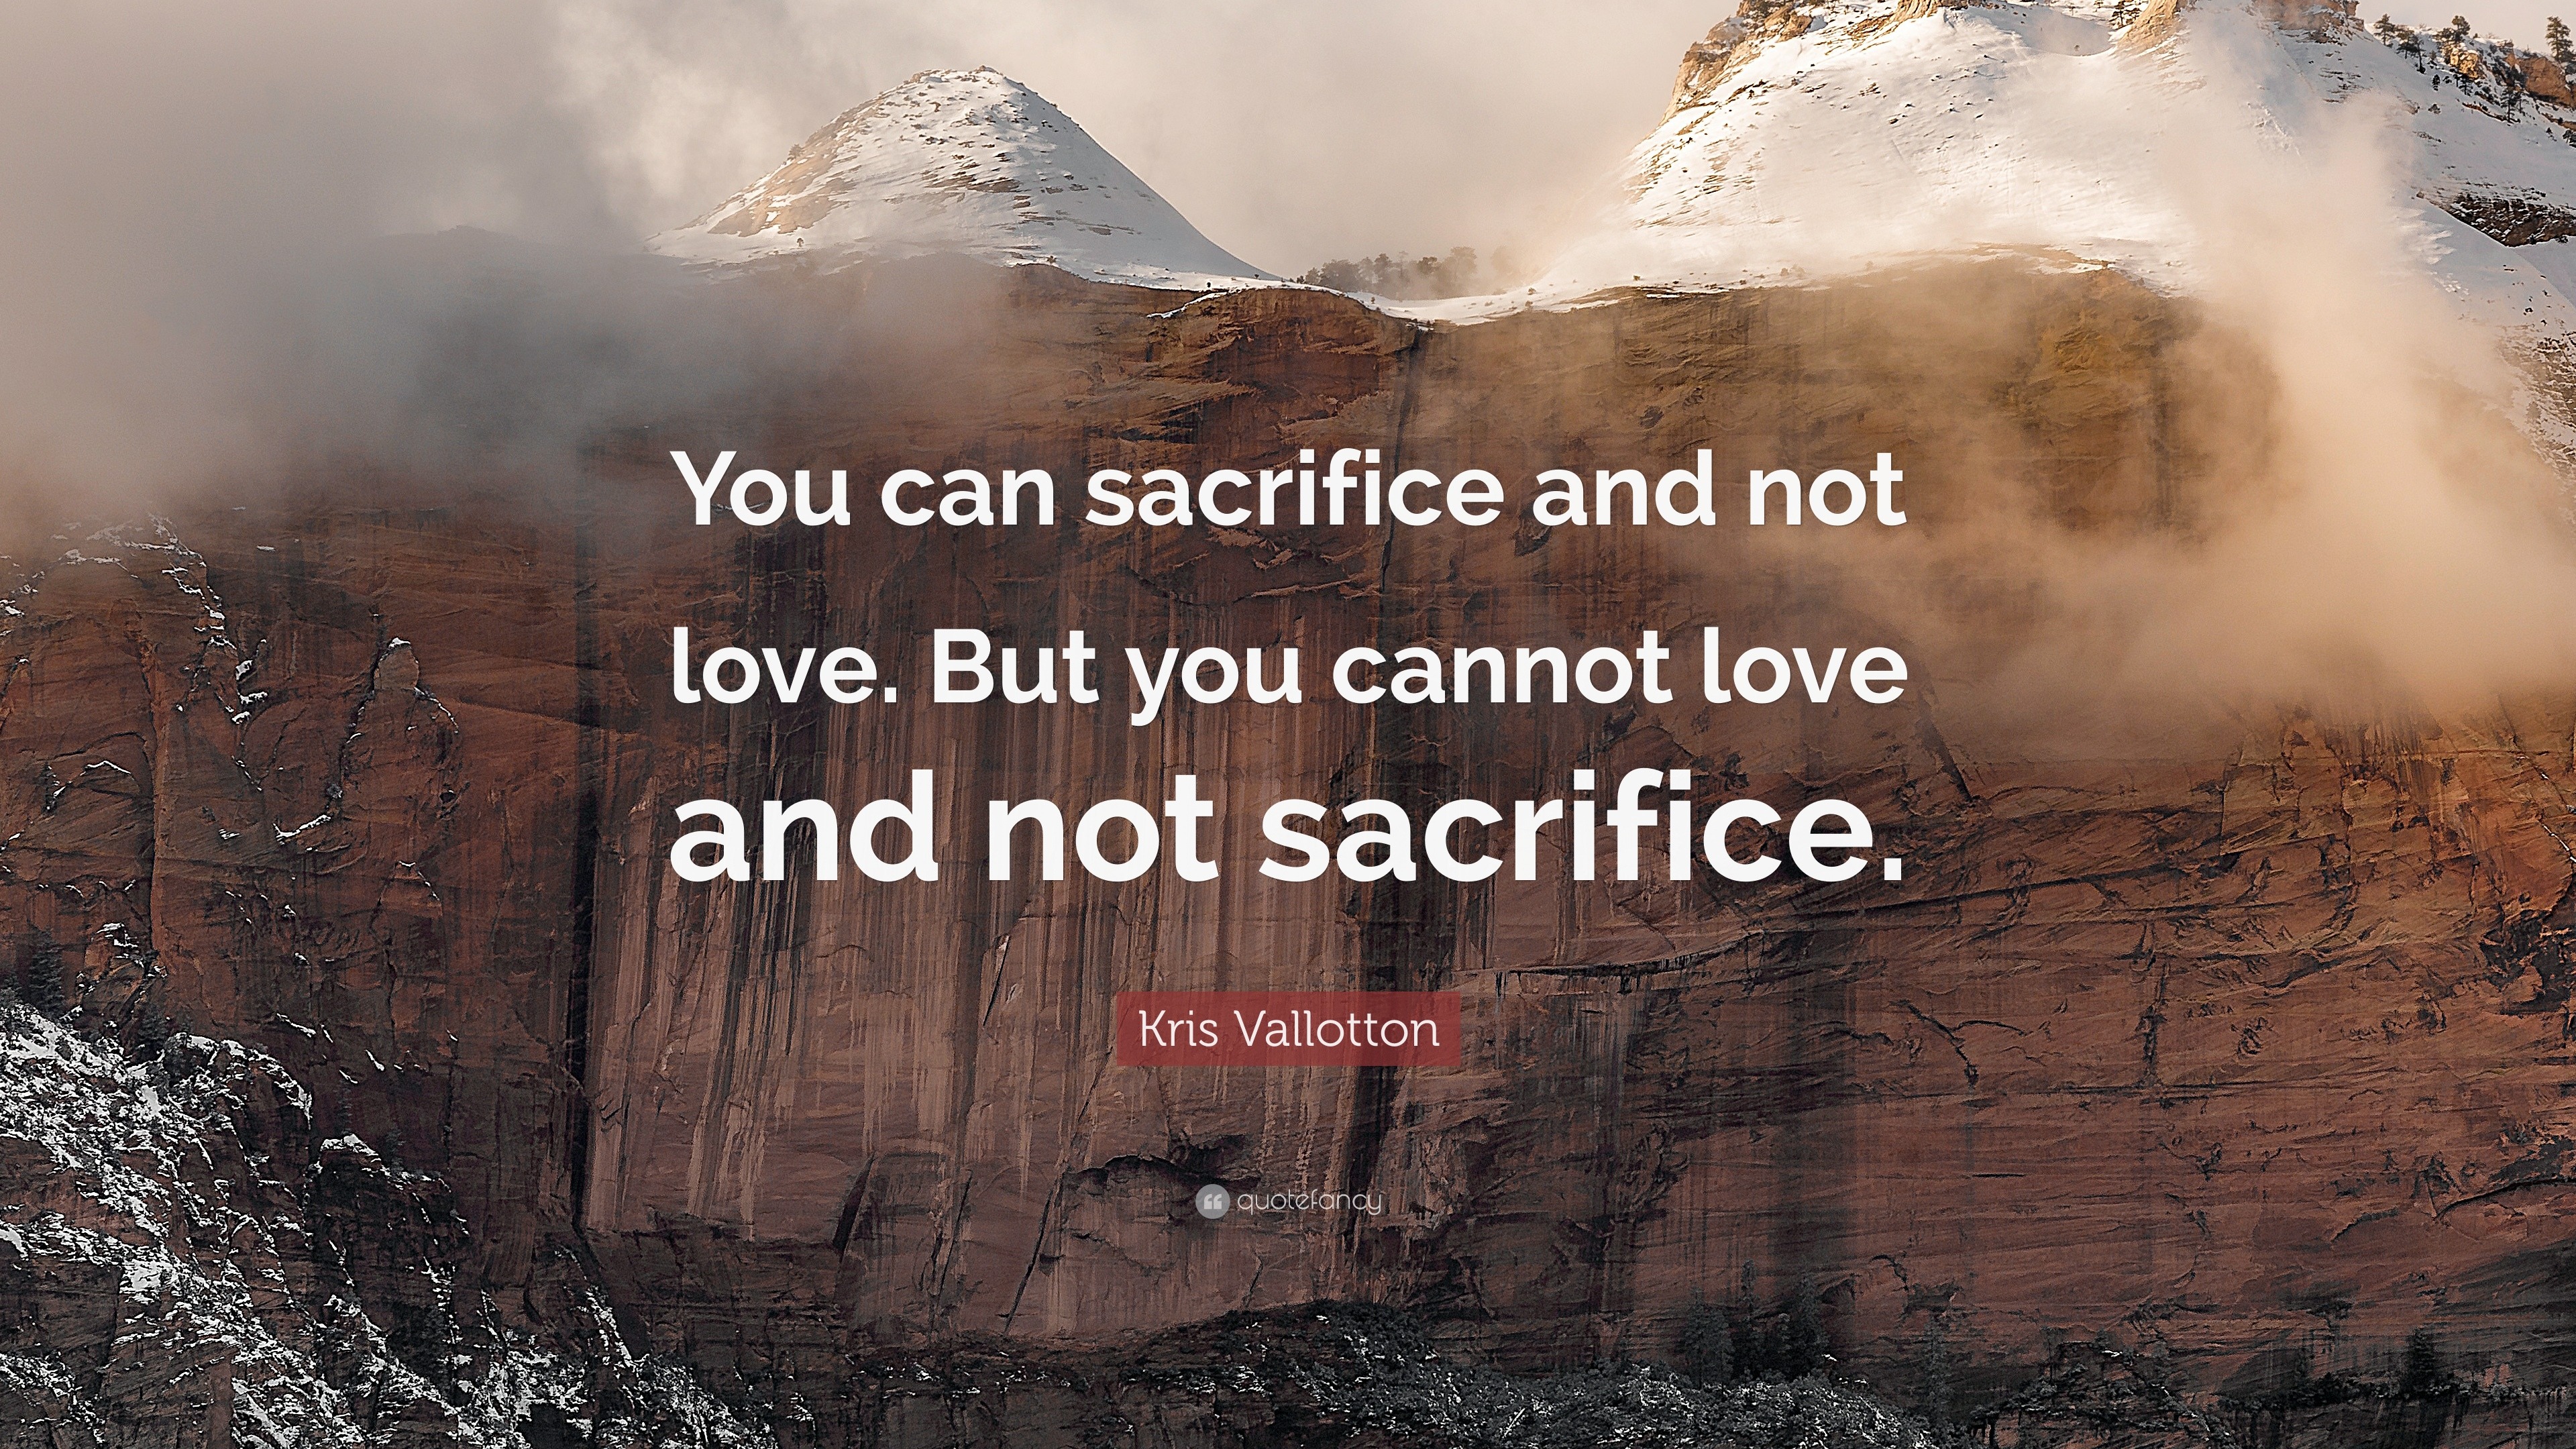 Kris Vallotton Quote “You can sacrifice and not love But you cannot love